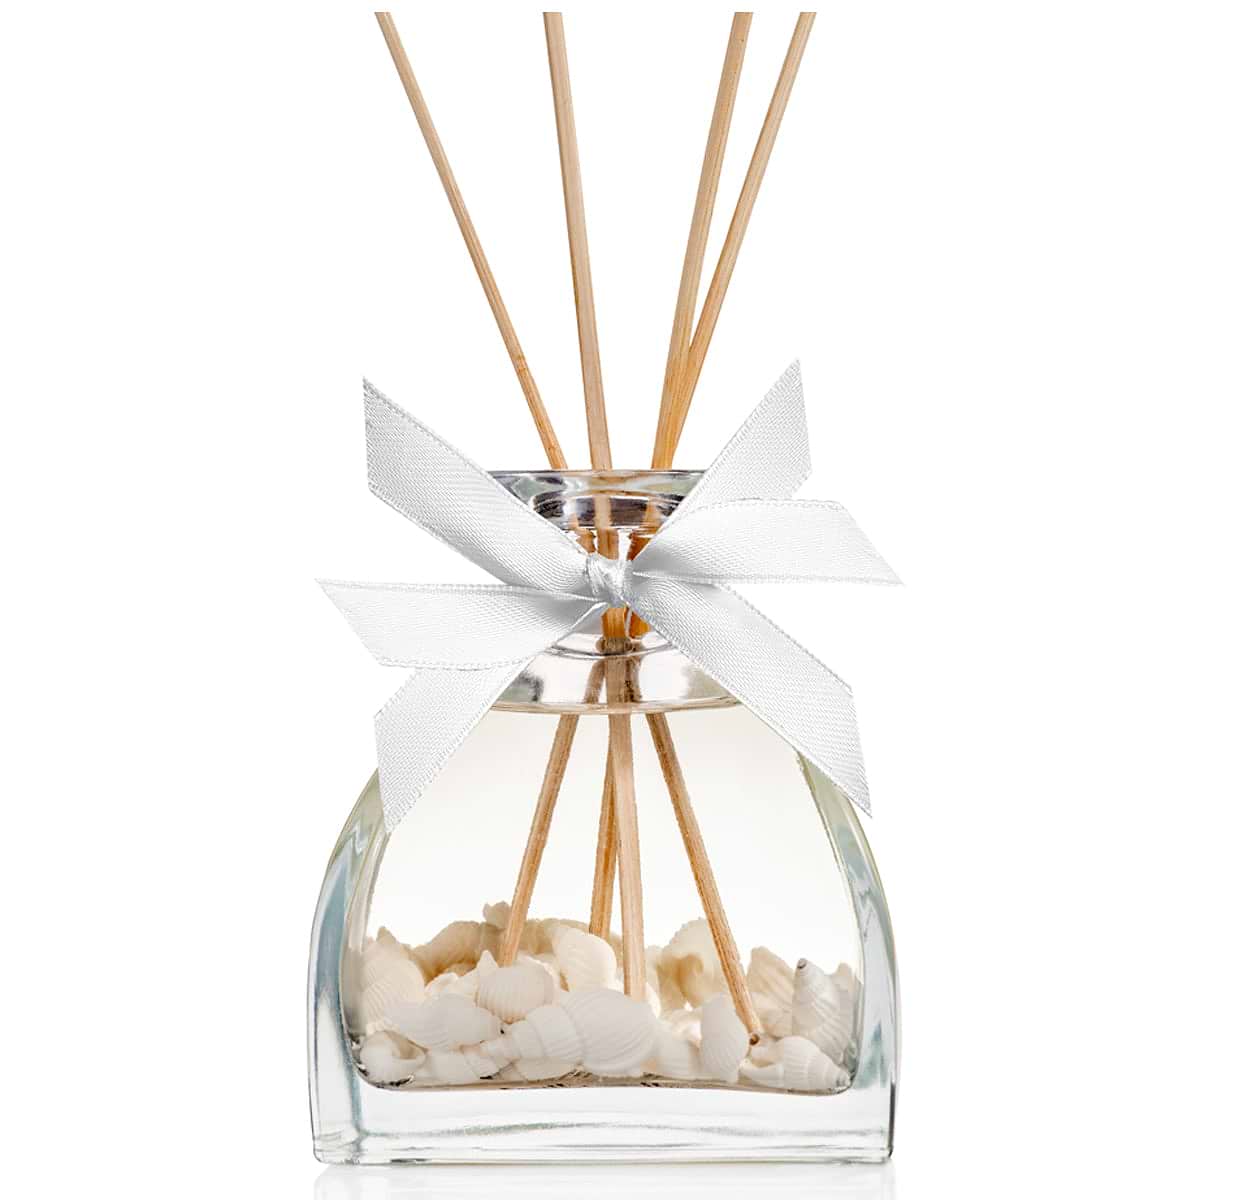 SPRING Fragrance Reed Diffuser Set | Large 9.47oz (280ml) | Fragrance Made in France | Home Décor | Scented Aromatic Oil with Best Ingredients | Room Air Freshener with Sea Shells & White Flower